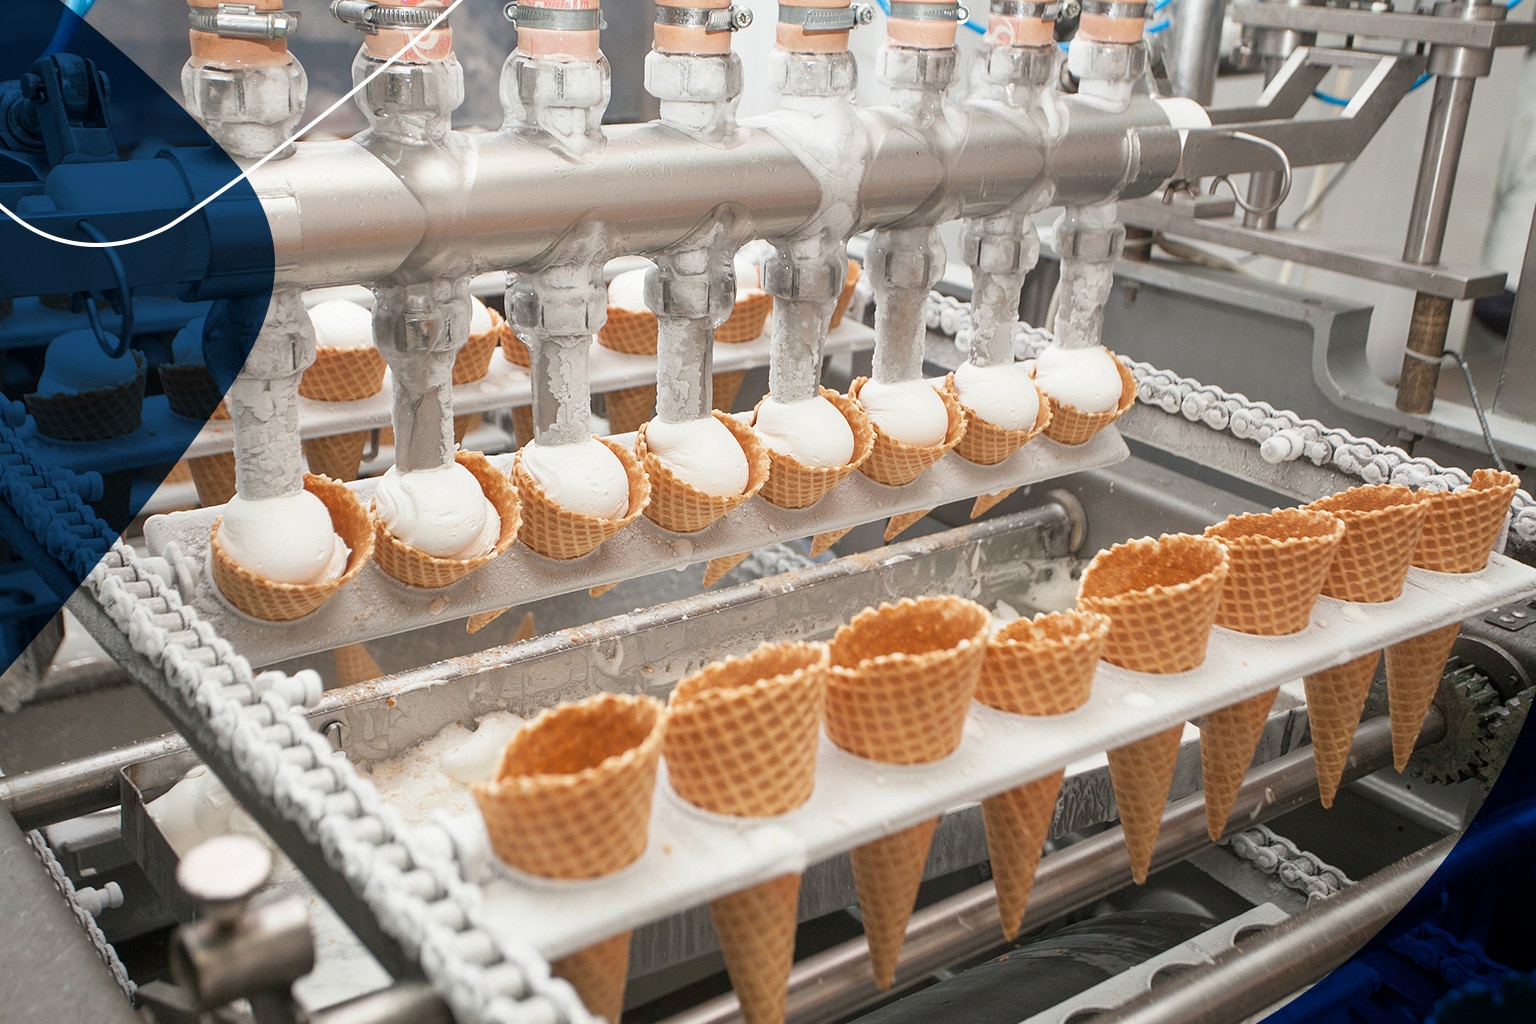 Disinfection in the ice cream industry